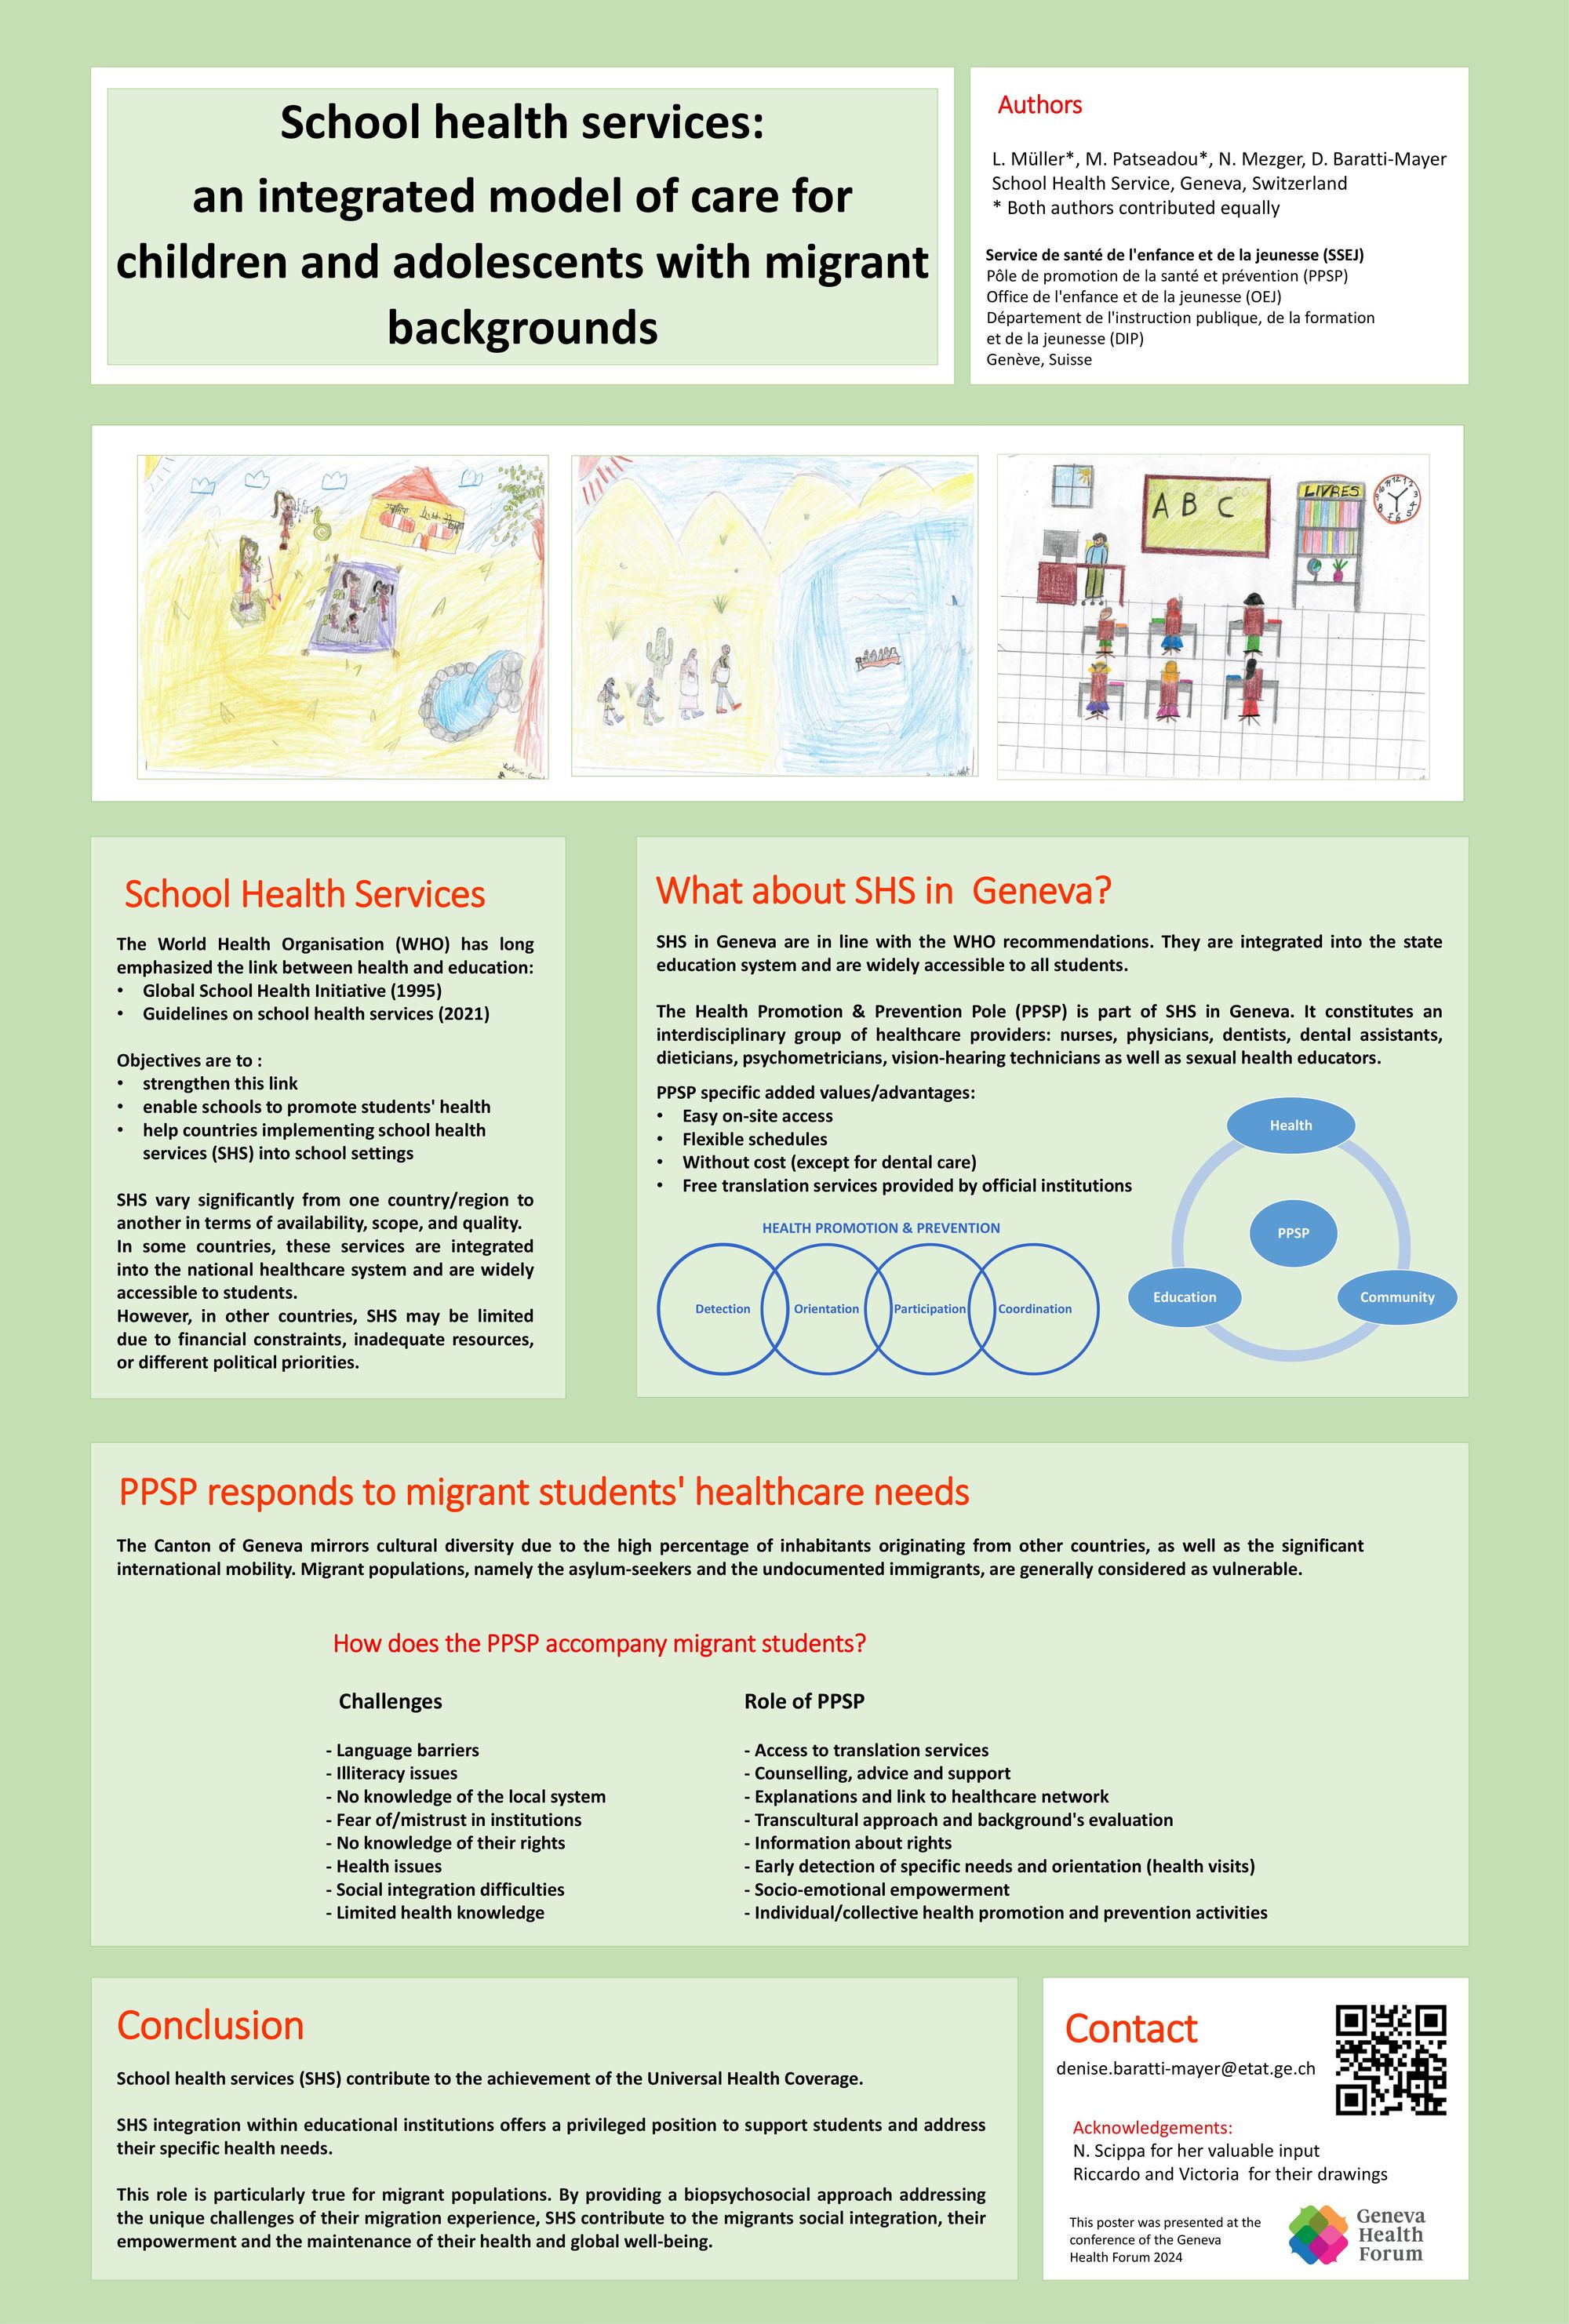 School health services: an integrated model of care for children and adolescents with migrant backgrounds